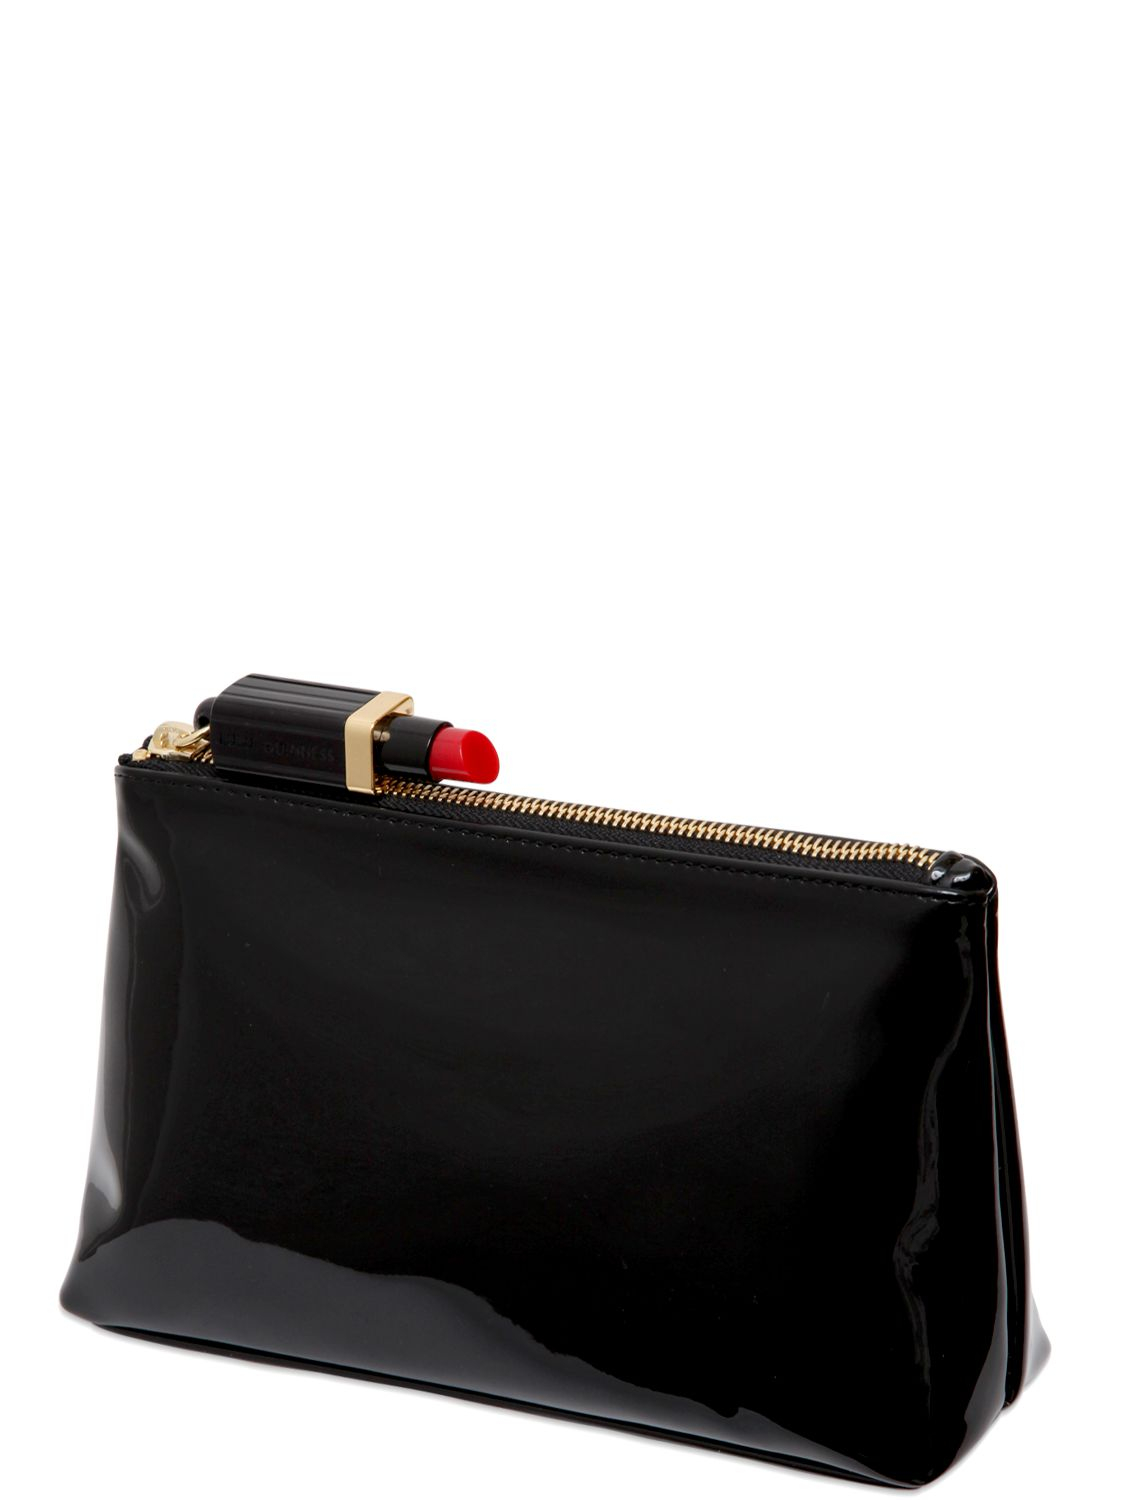 Lyst - Lulu Guinness Patent Leather Makeup Bag in Black